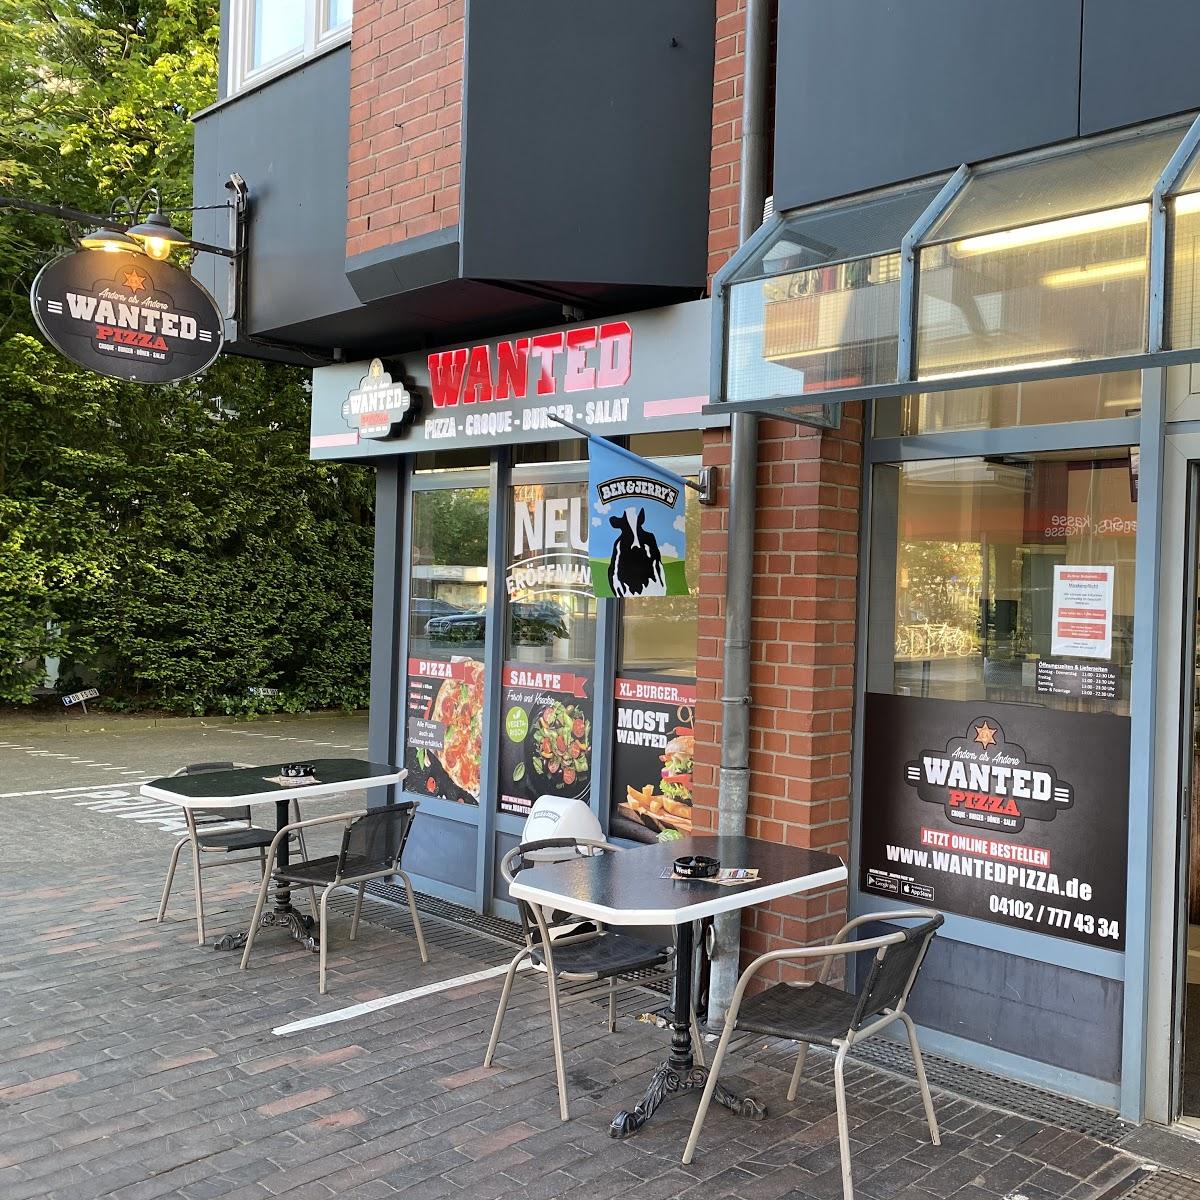 Restaurant "WANTED Pizza" in Ahrensburg